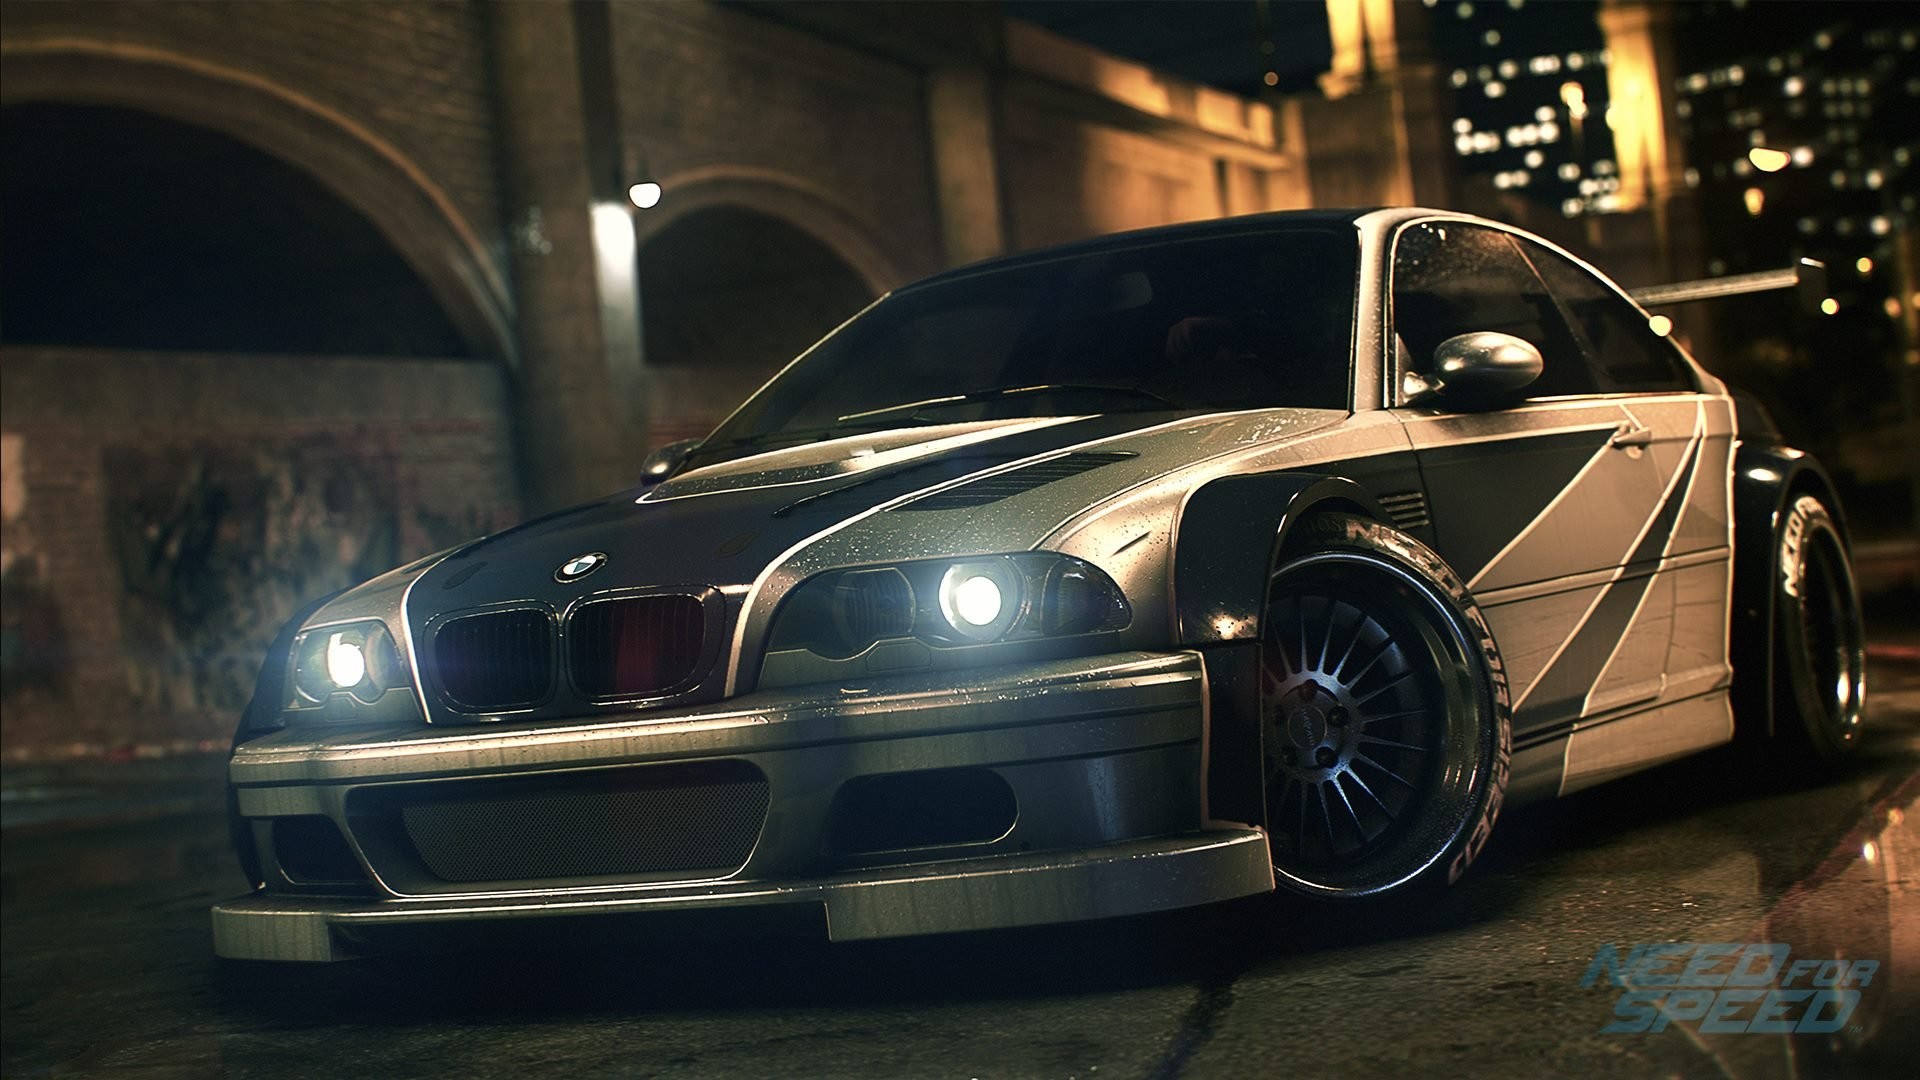 most wanted wallpaper hd,land vehicle,car,vehicle,coupé,bmw